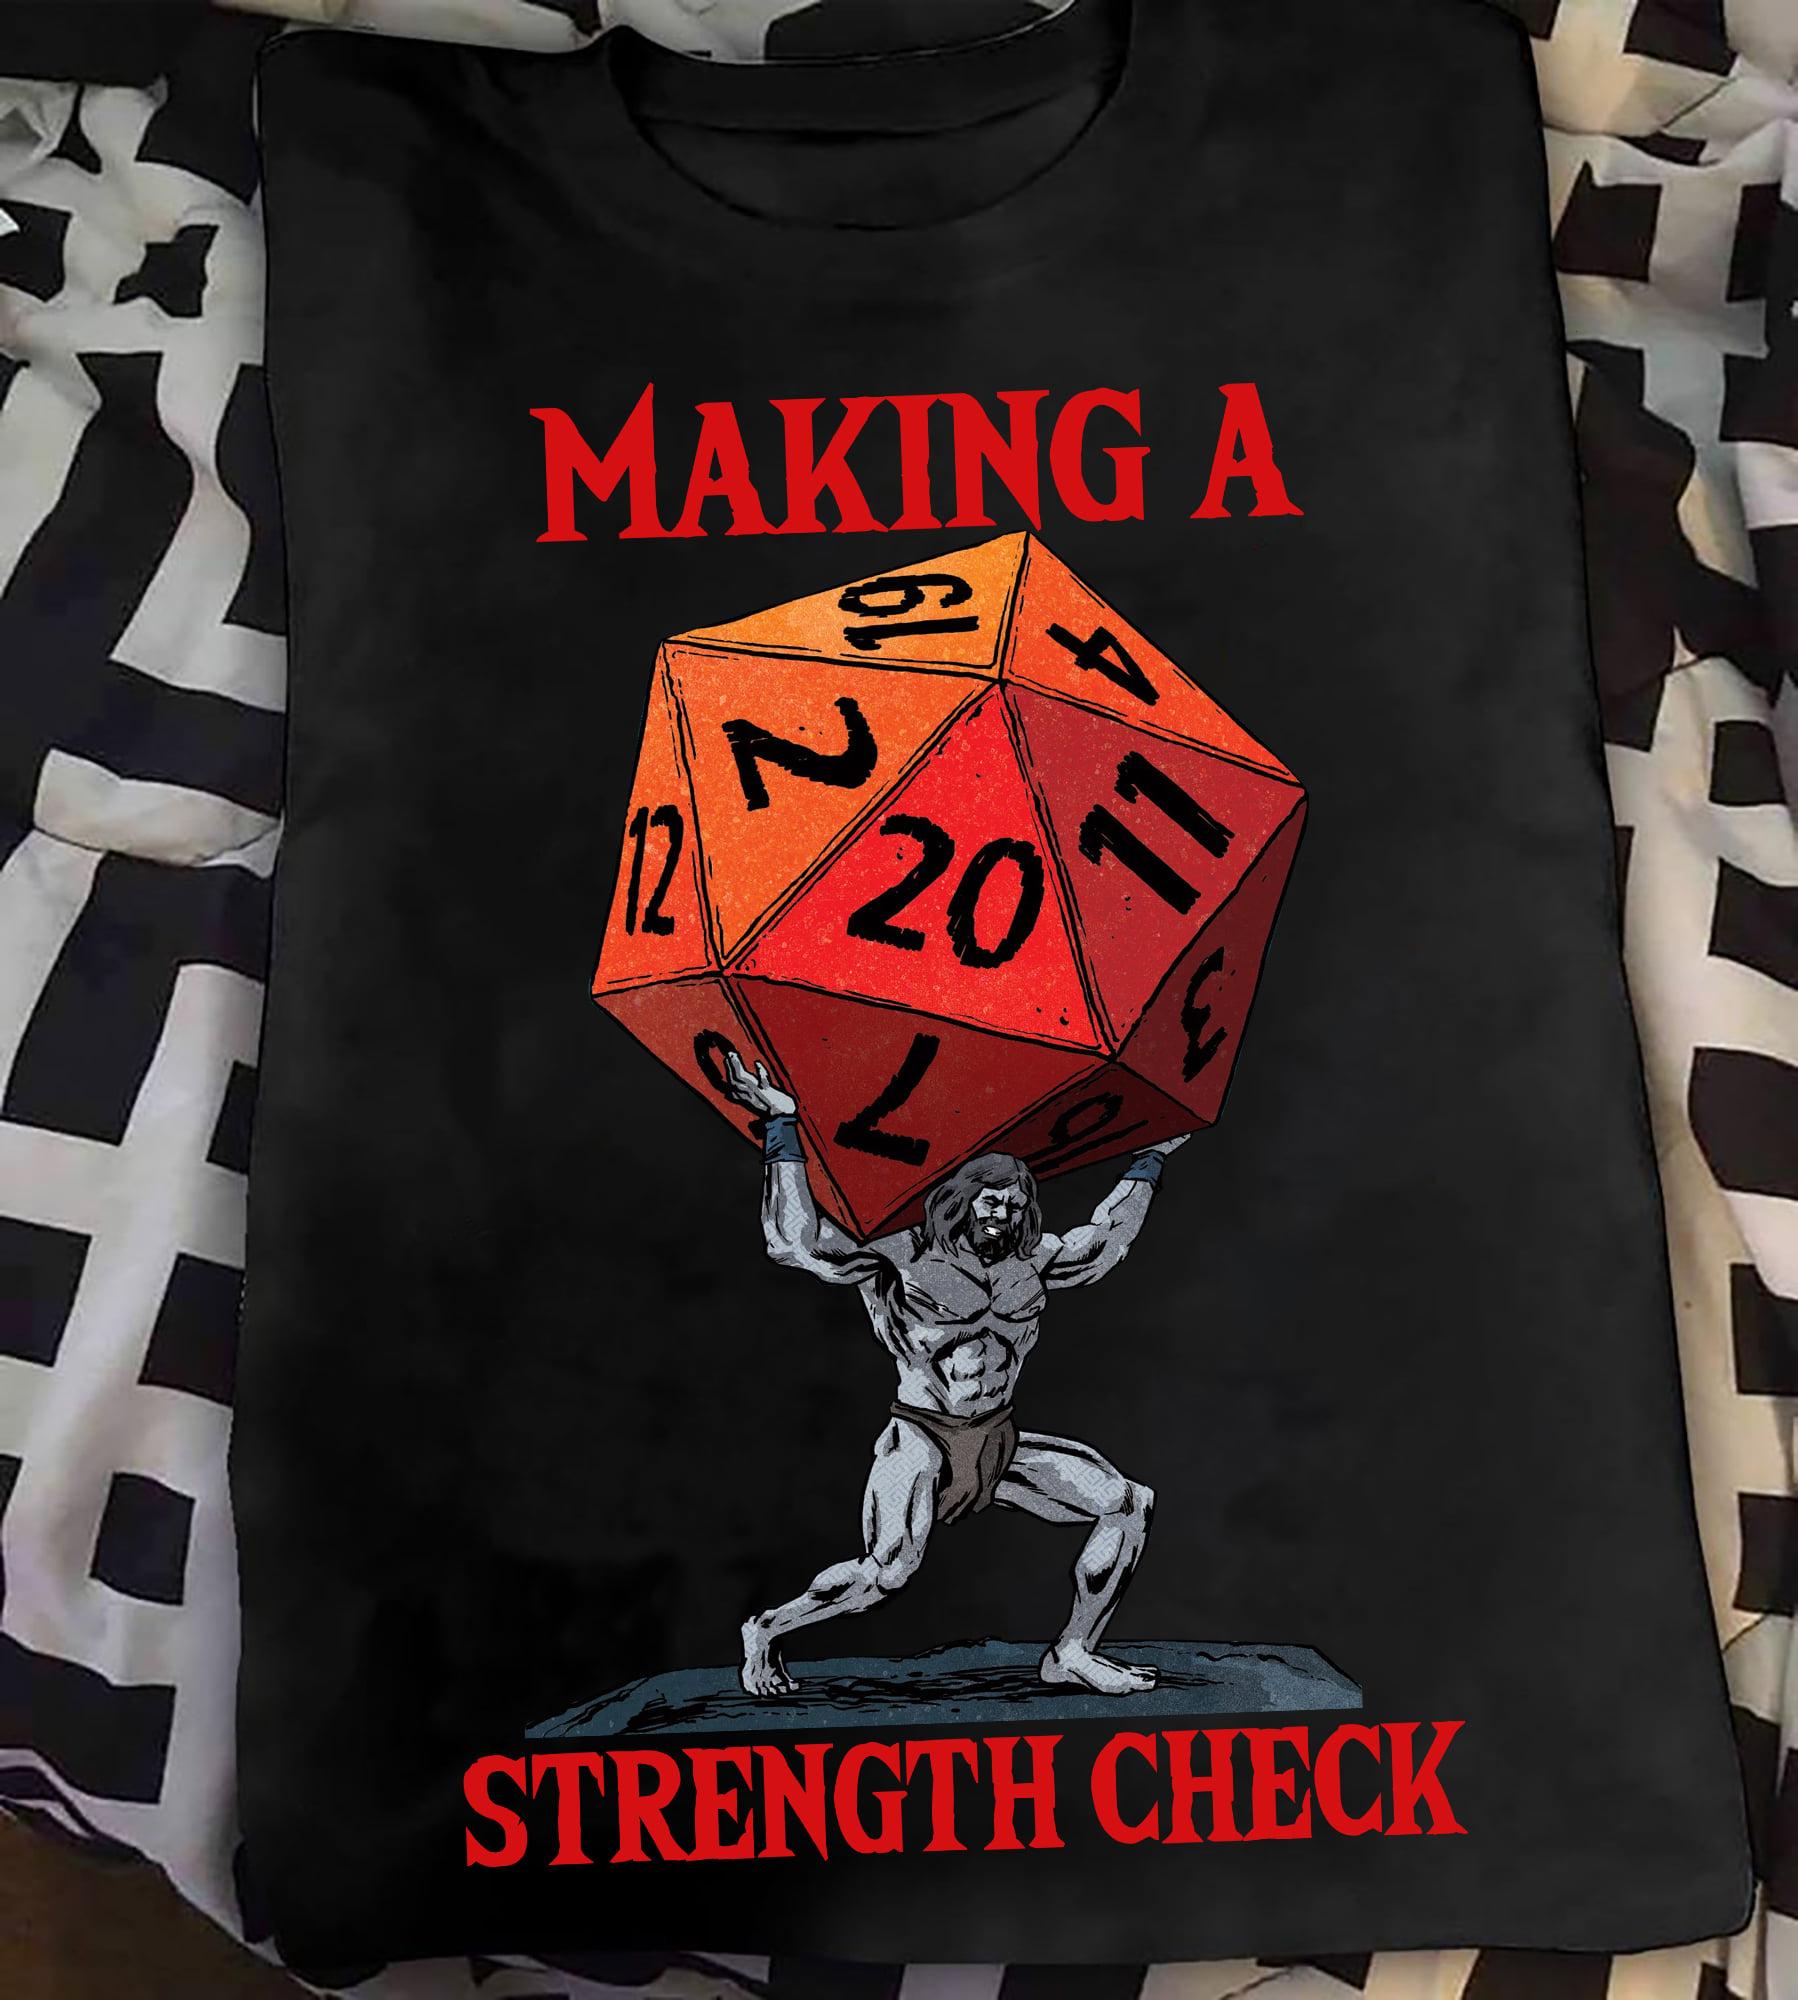 Jesus Weightlifting Dice, Dungeon And Dragon - Making a strength check